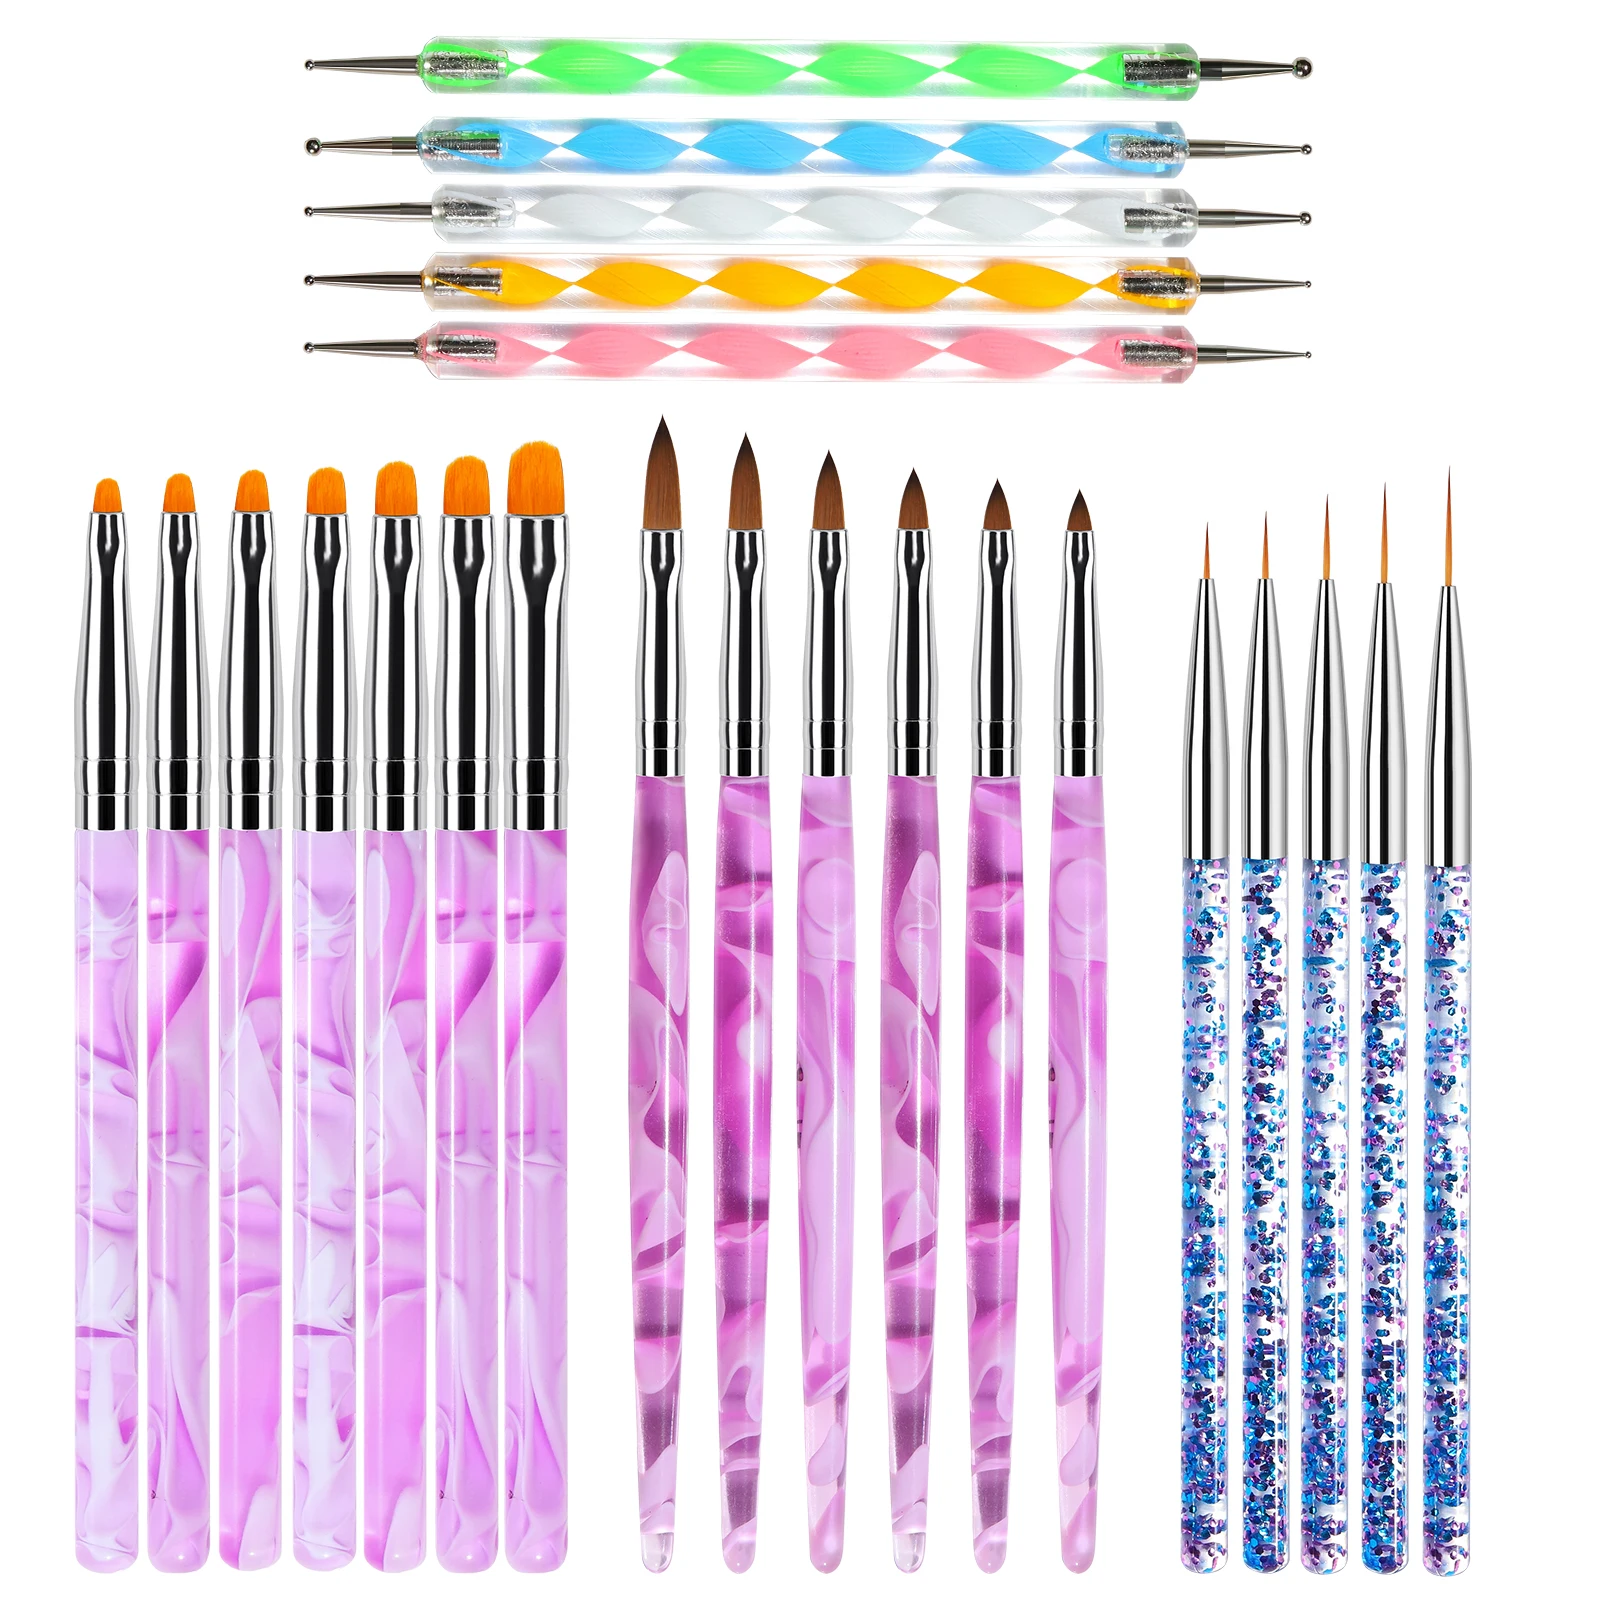 

15-23Pcs/Set Nail Art Brushes Phototherapy Drawing Pen and Nails Dotting Pens Painting UV Gel Polish Manicure Accessory Tool